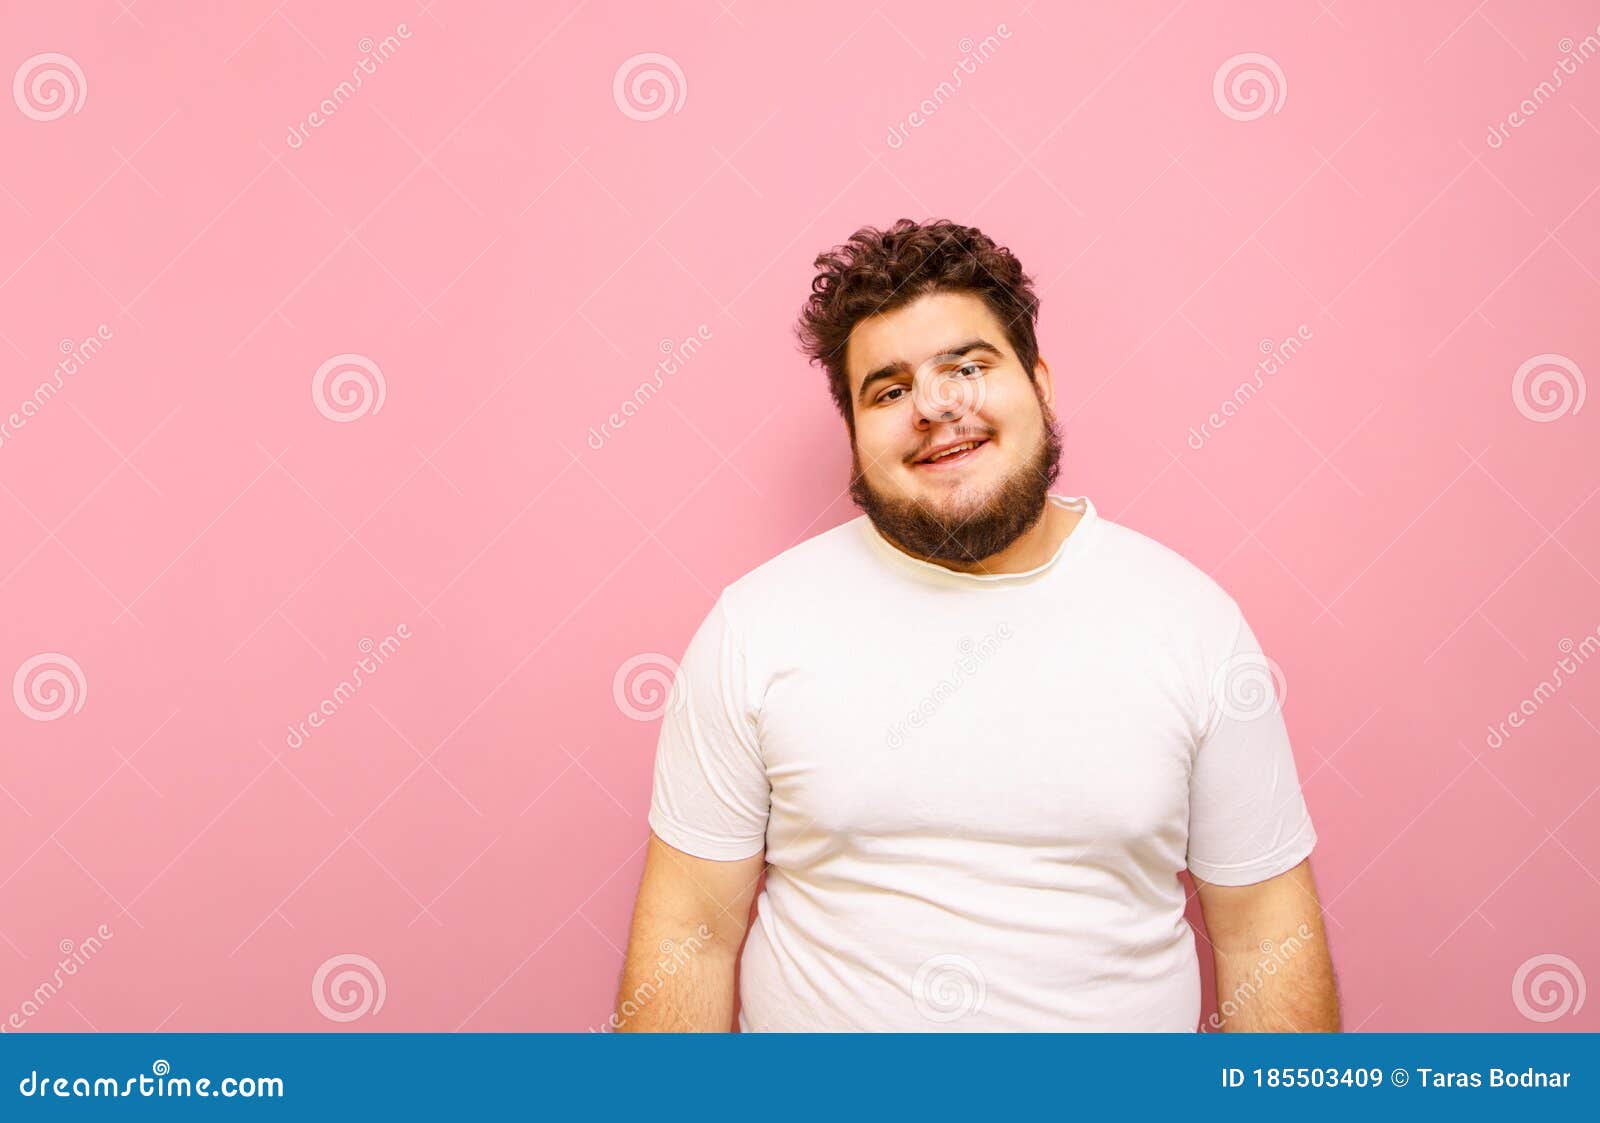 Portrait of a Funny Overweight Guy on a Pink Background, Wearing a White  T-shirt and Beard, Looking into the Camera and Smiling. Stock Image - Image  of copy, masculine: 185503409